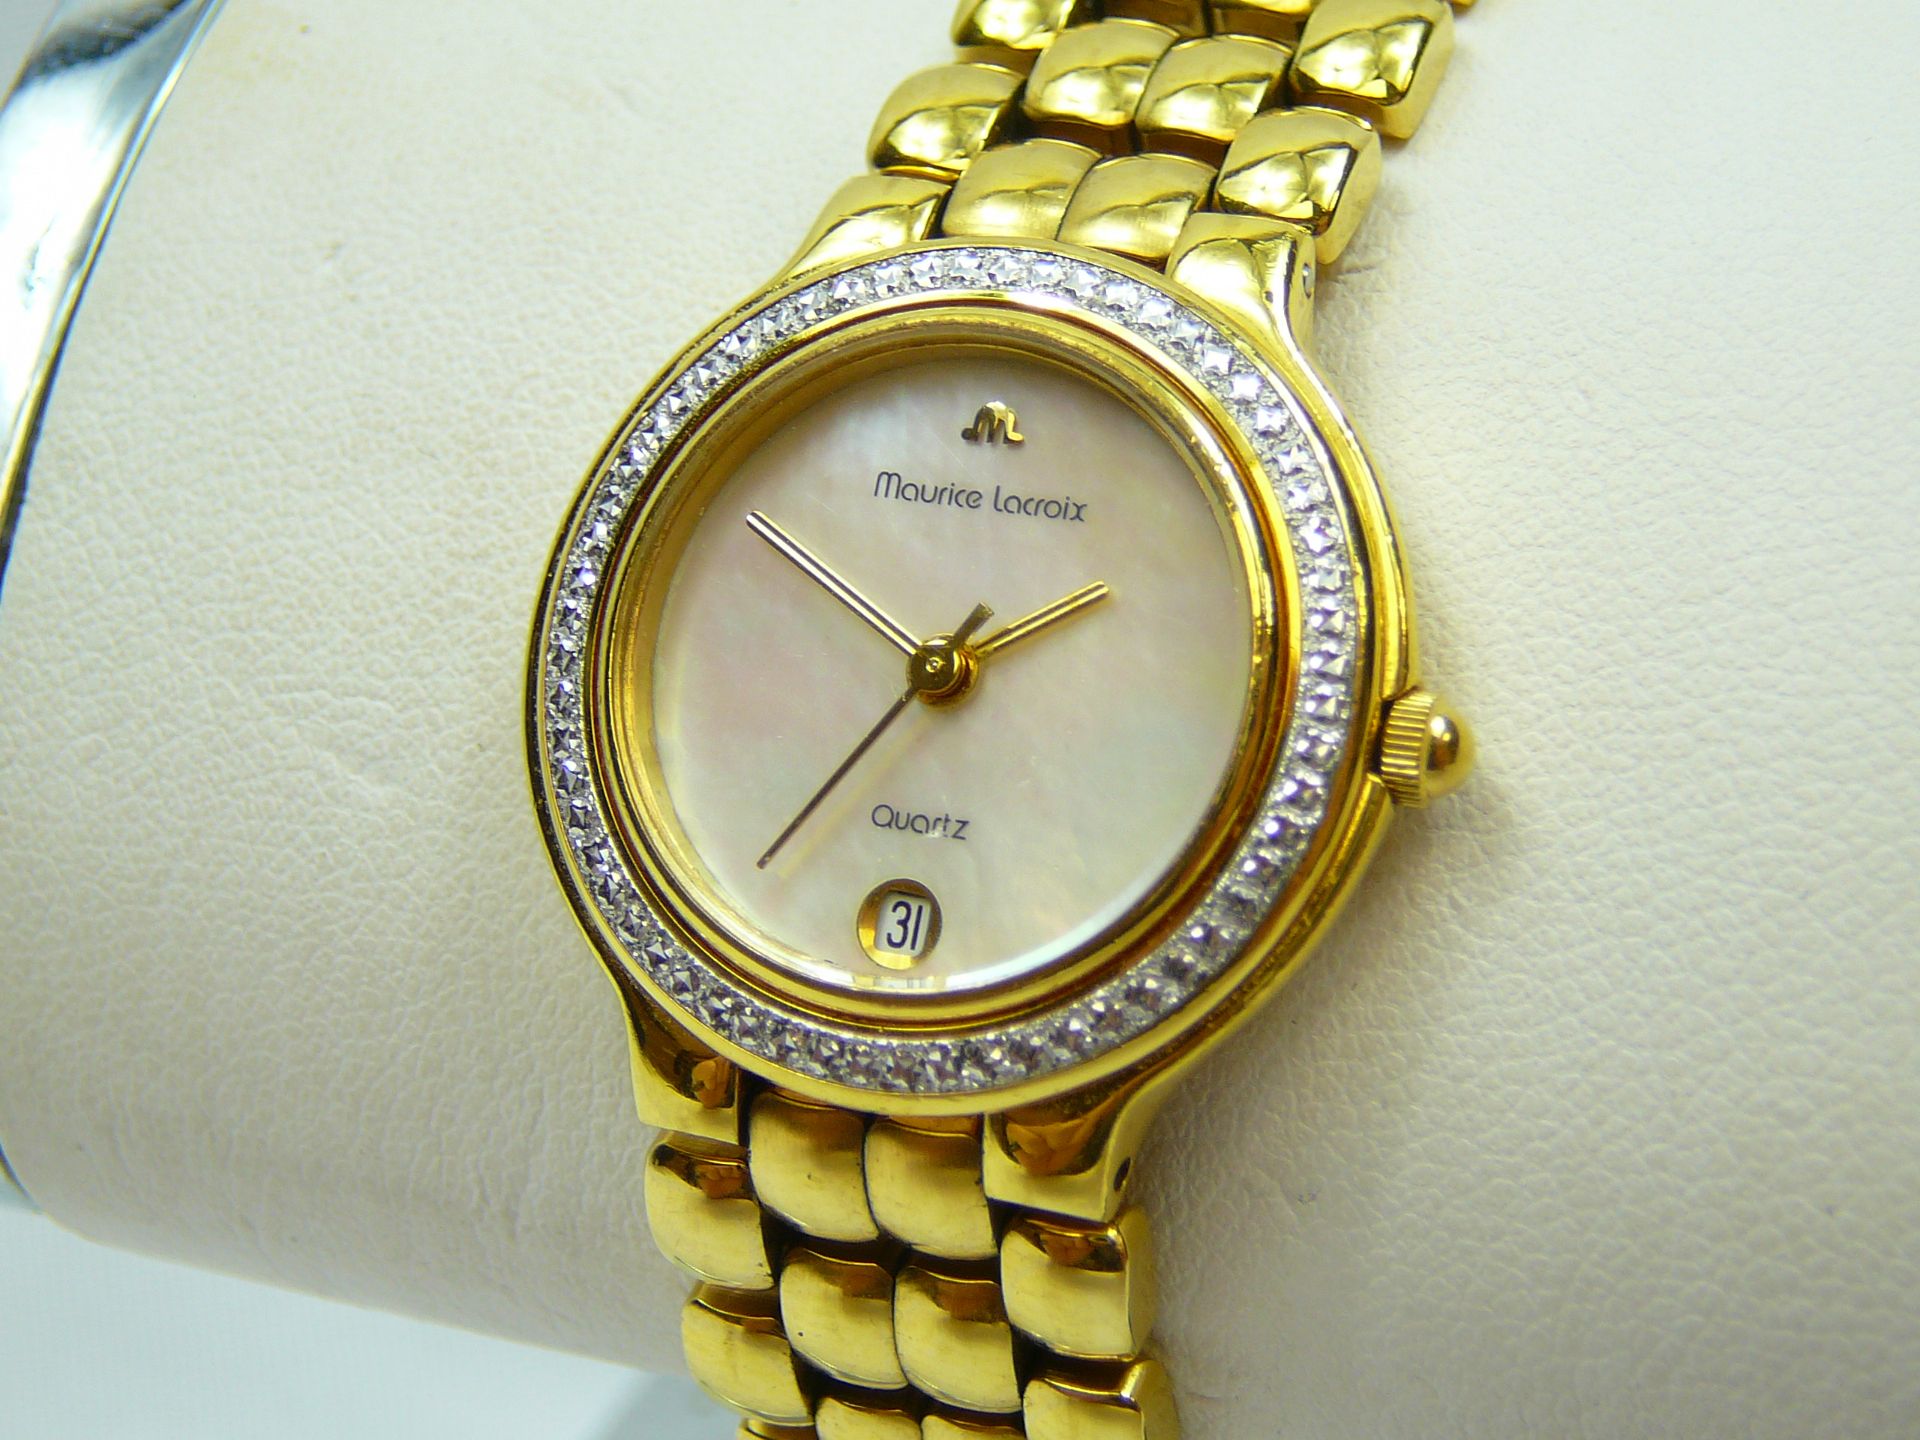 Ladies Maurice Lacroix Wrist Watch - Image 2 of 3